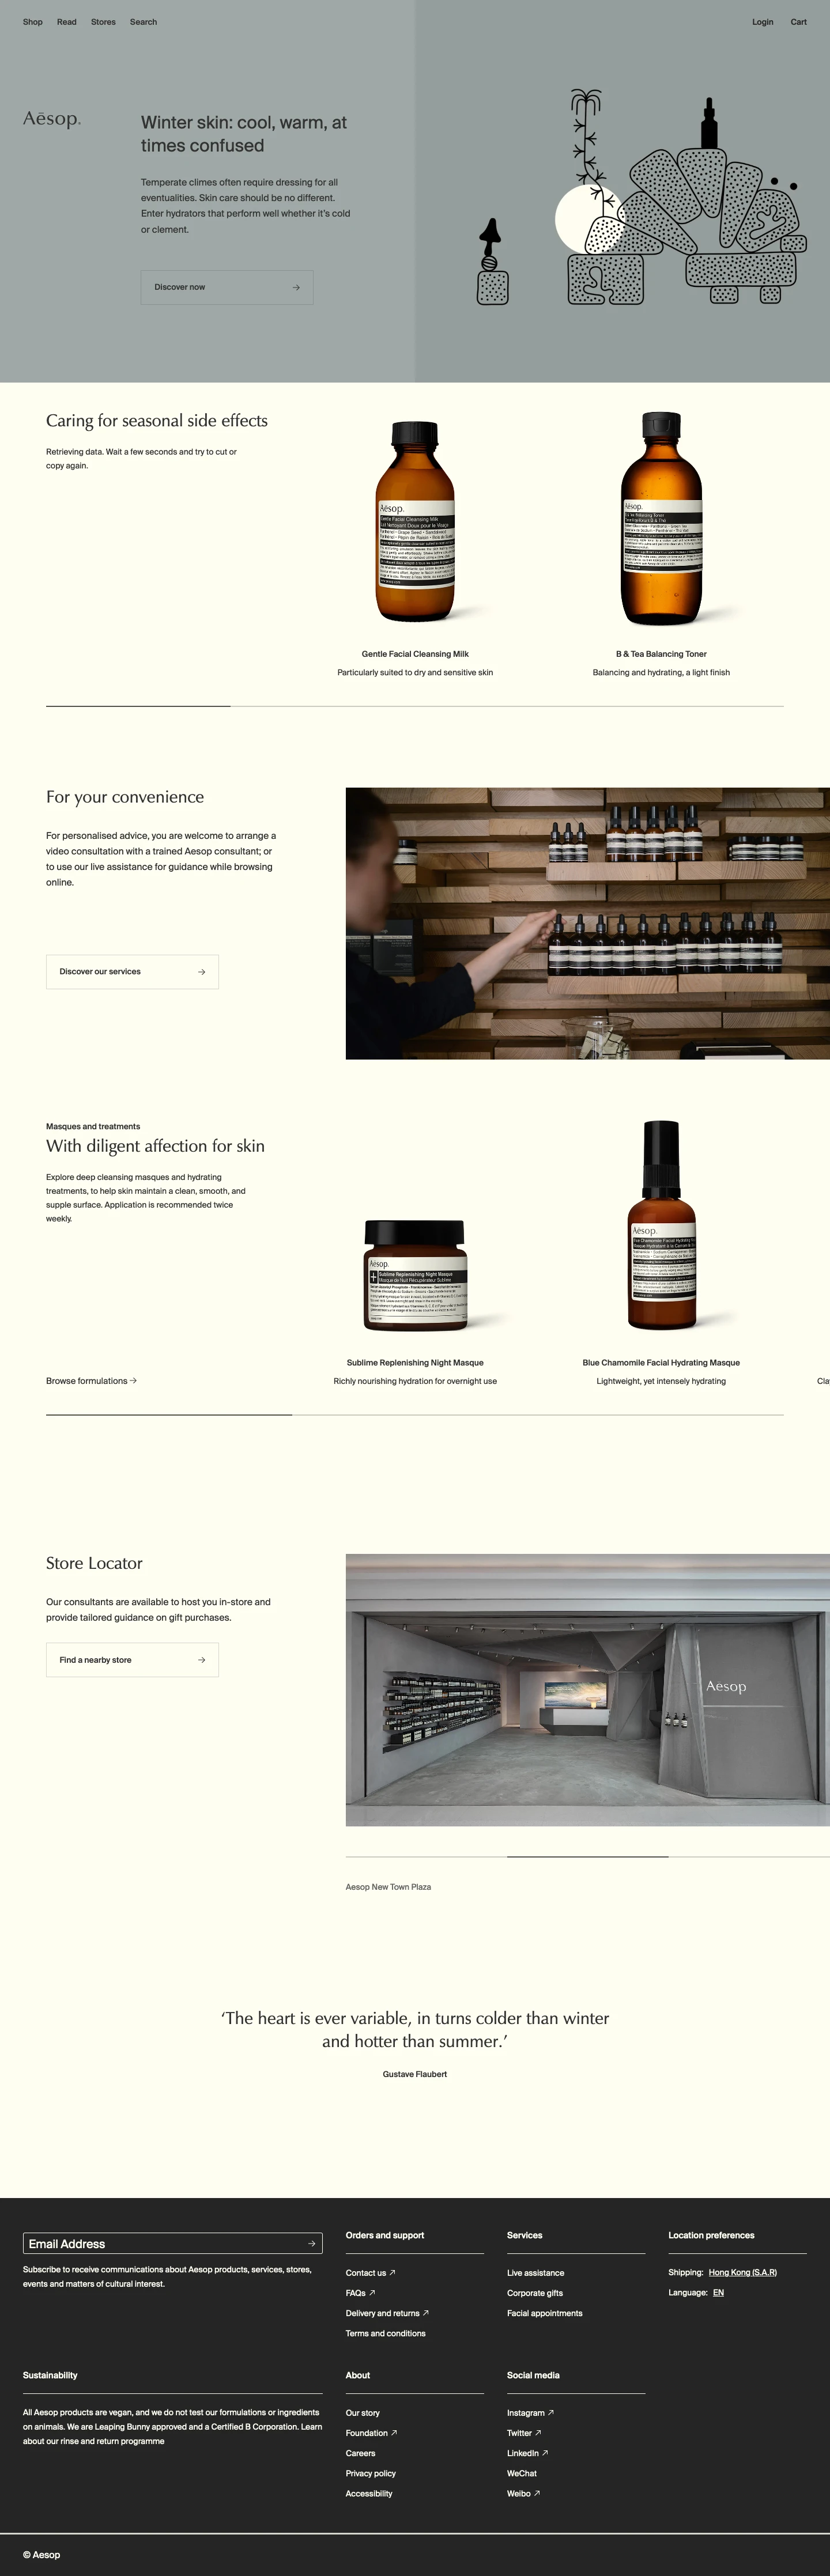 Aesop Landing Page Example: Aesop offers skin, hair, body care formulations and home fragrances.